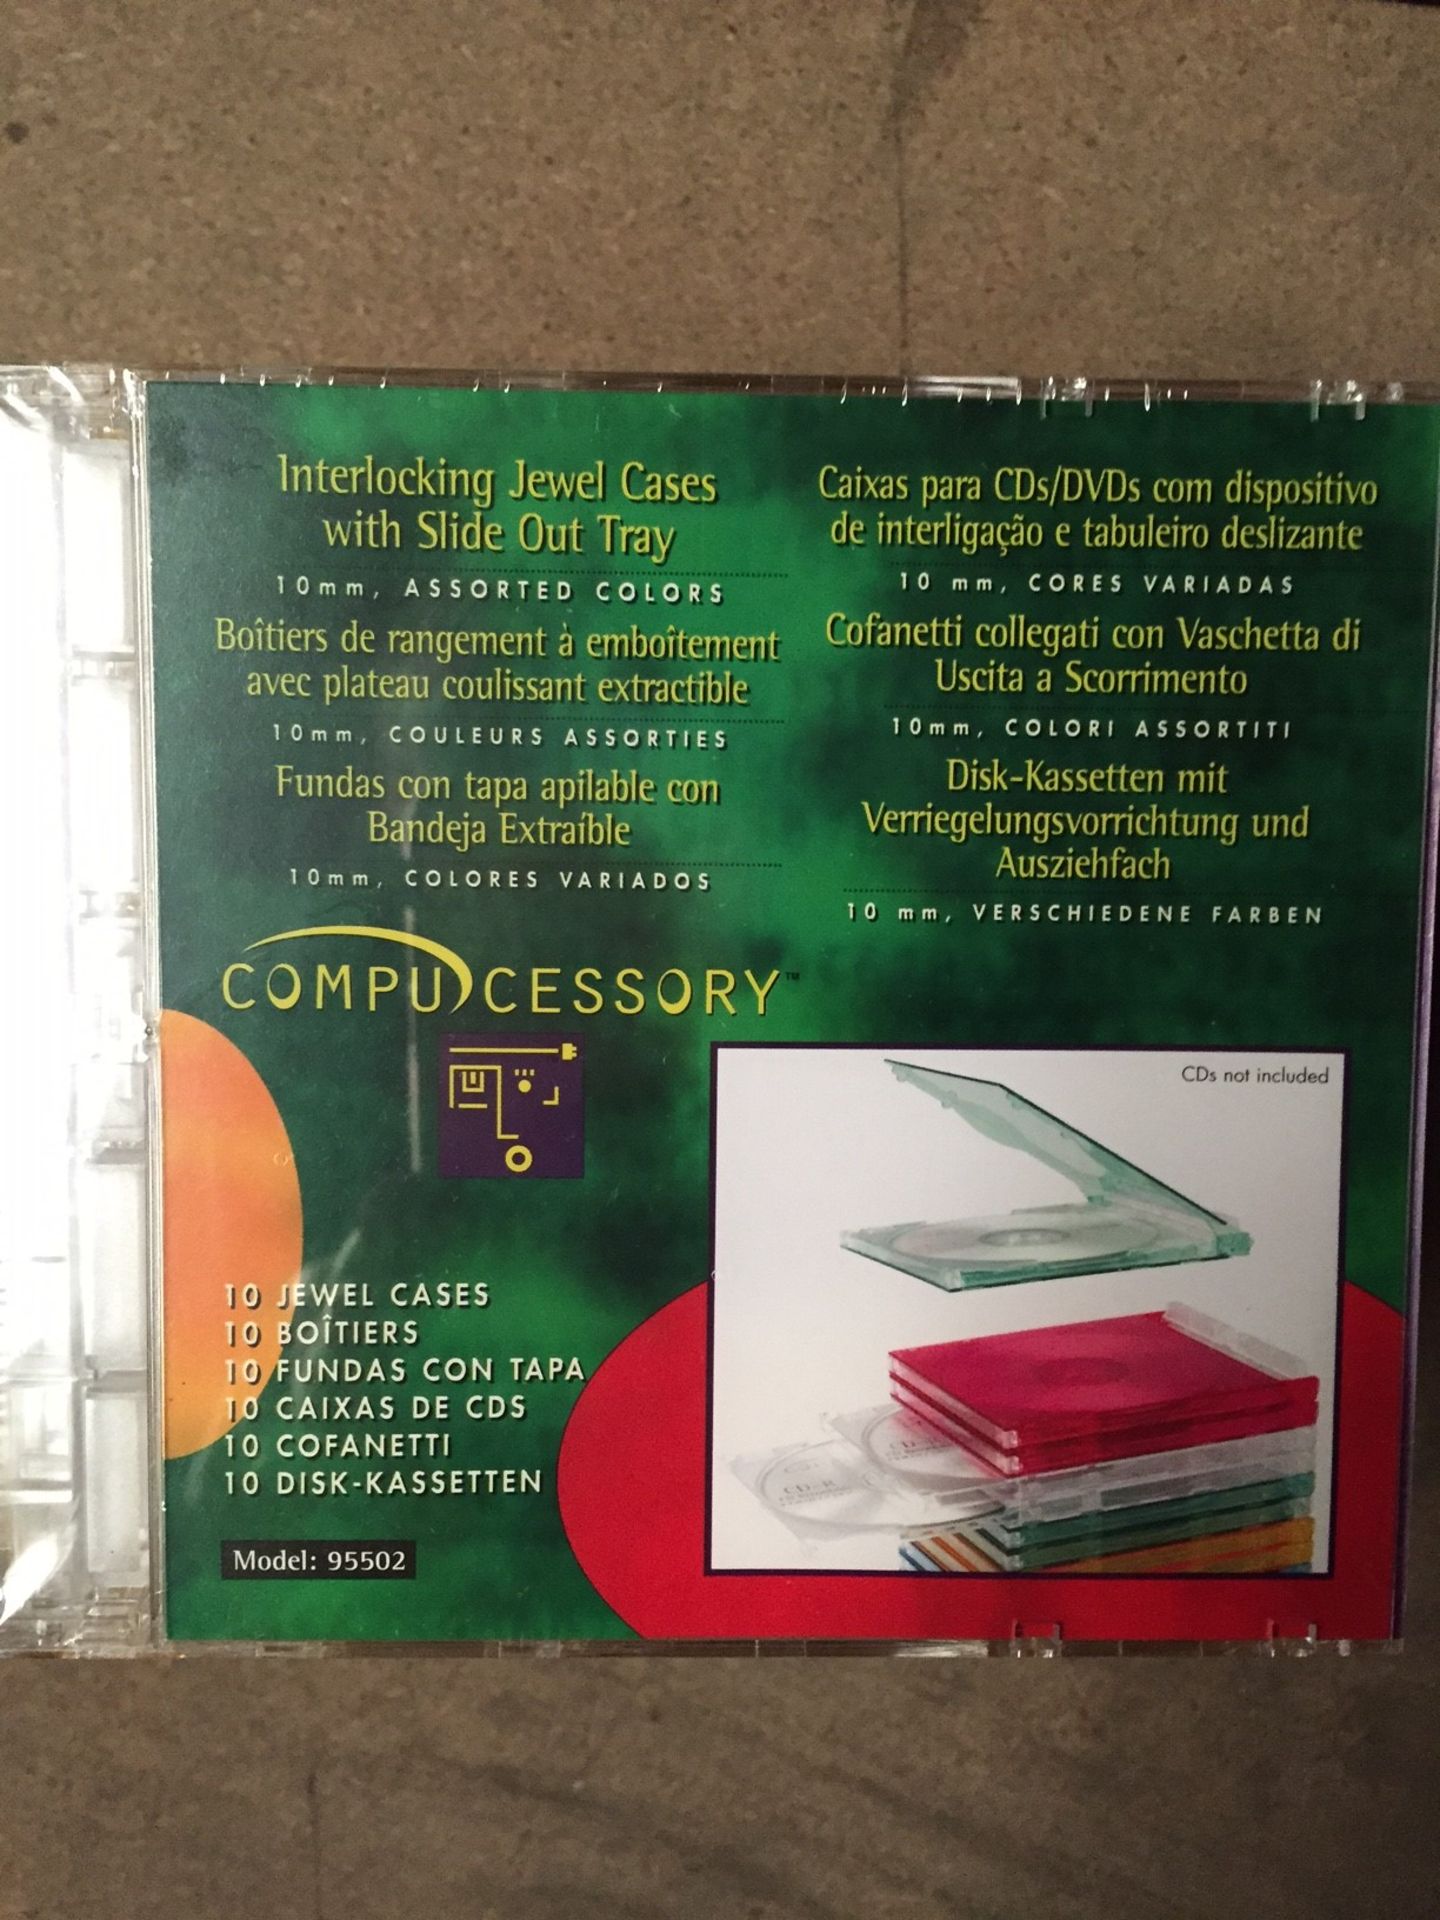 3 x Boxes of Compucessory Interlocking Jewel Cases Code 95502 - 300 Cases in Total (RRP £7.60 Each)